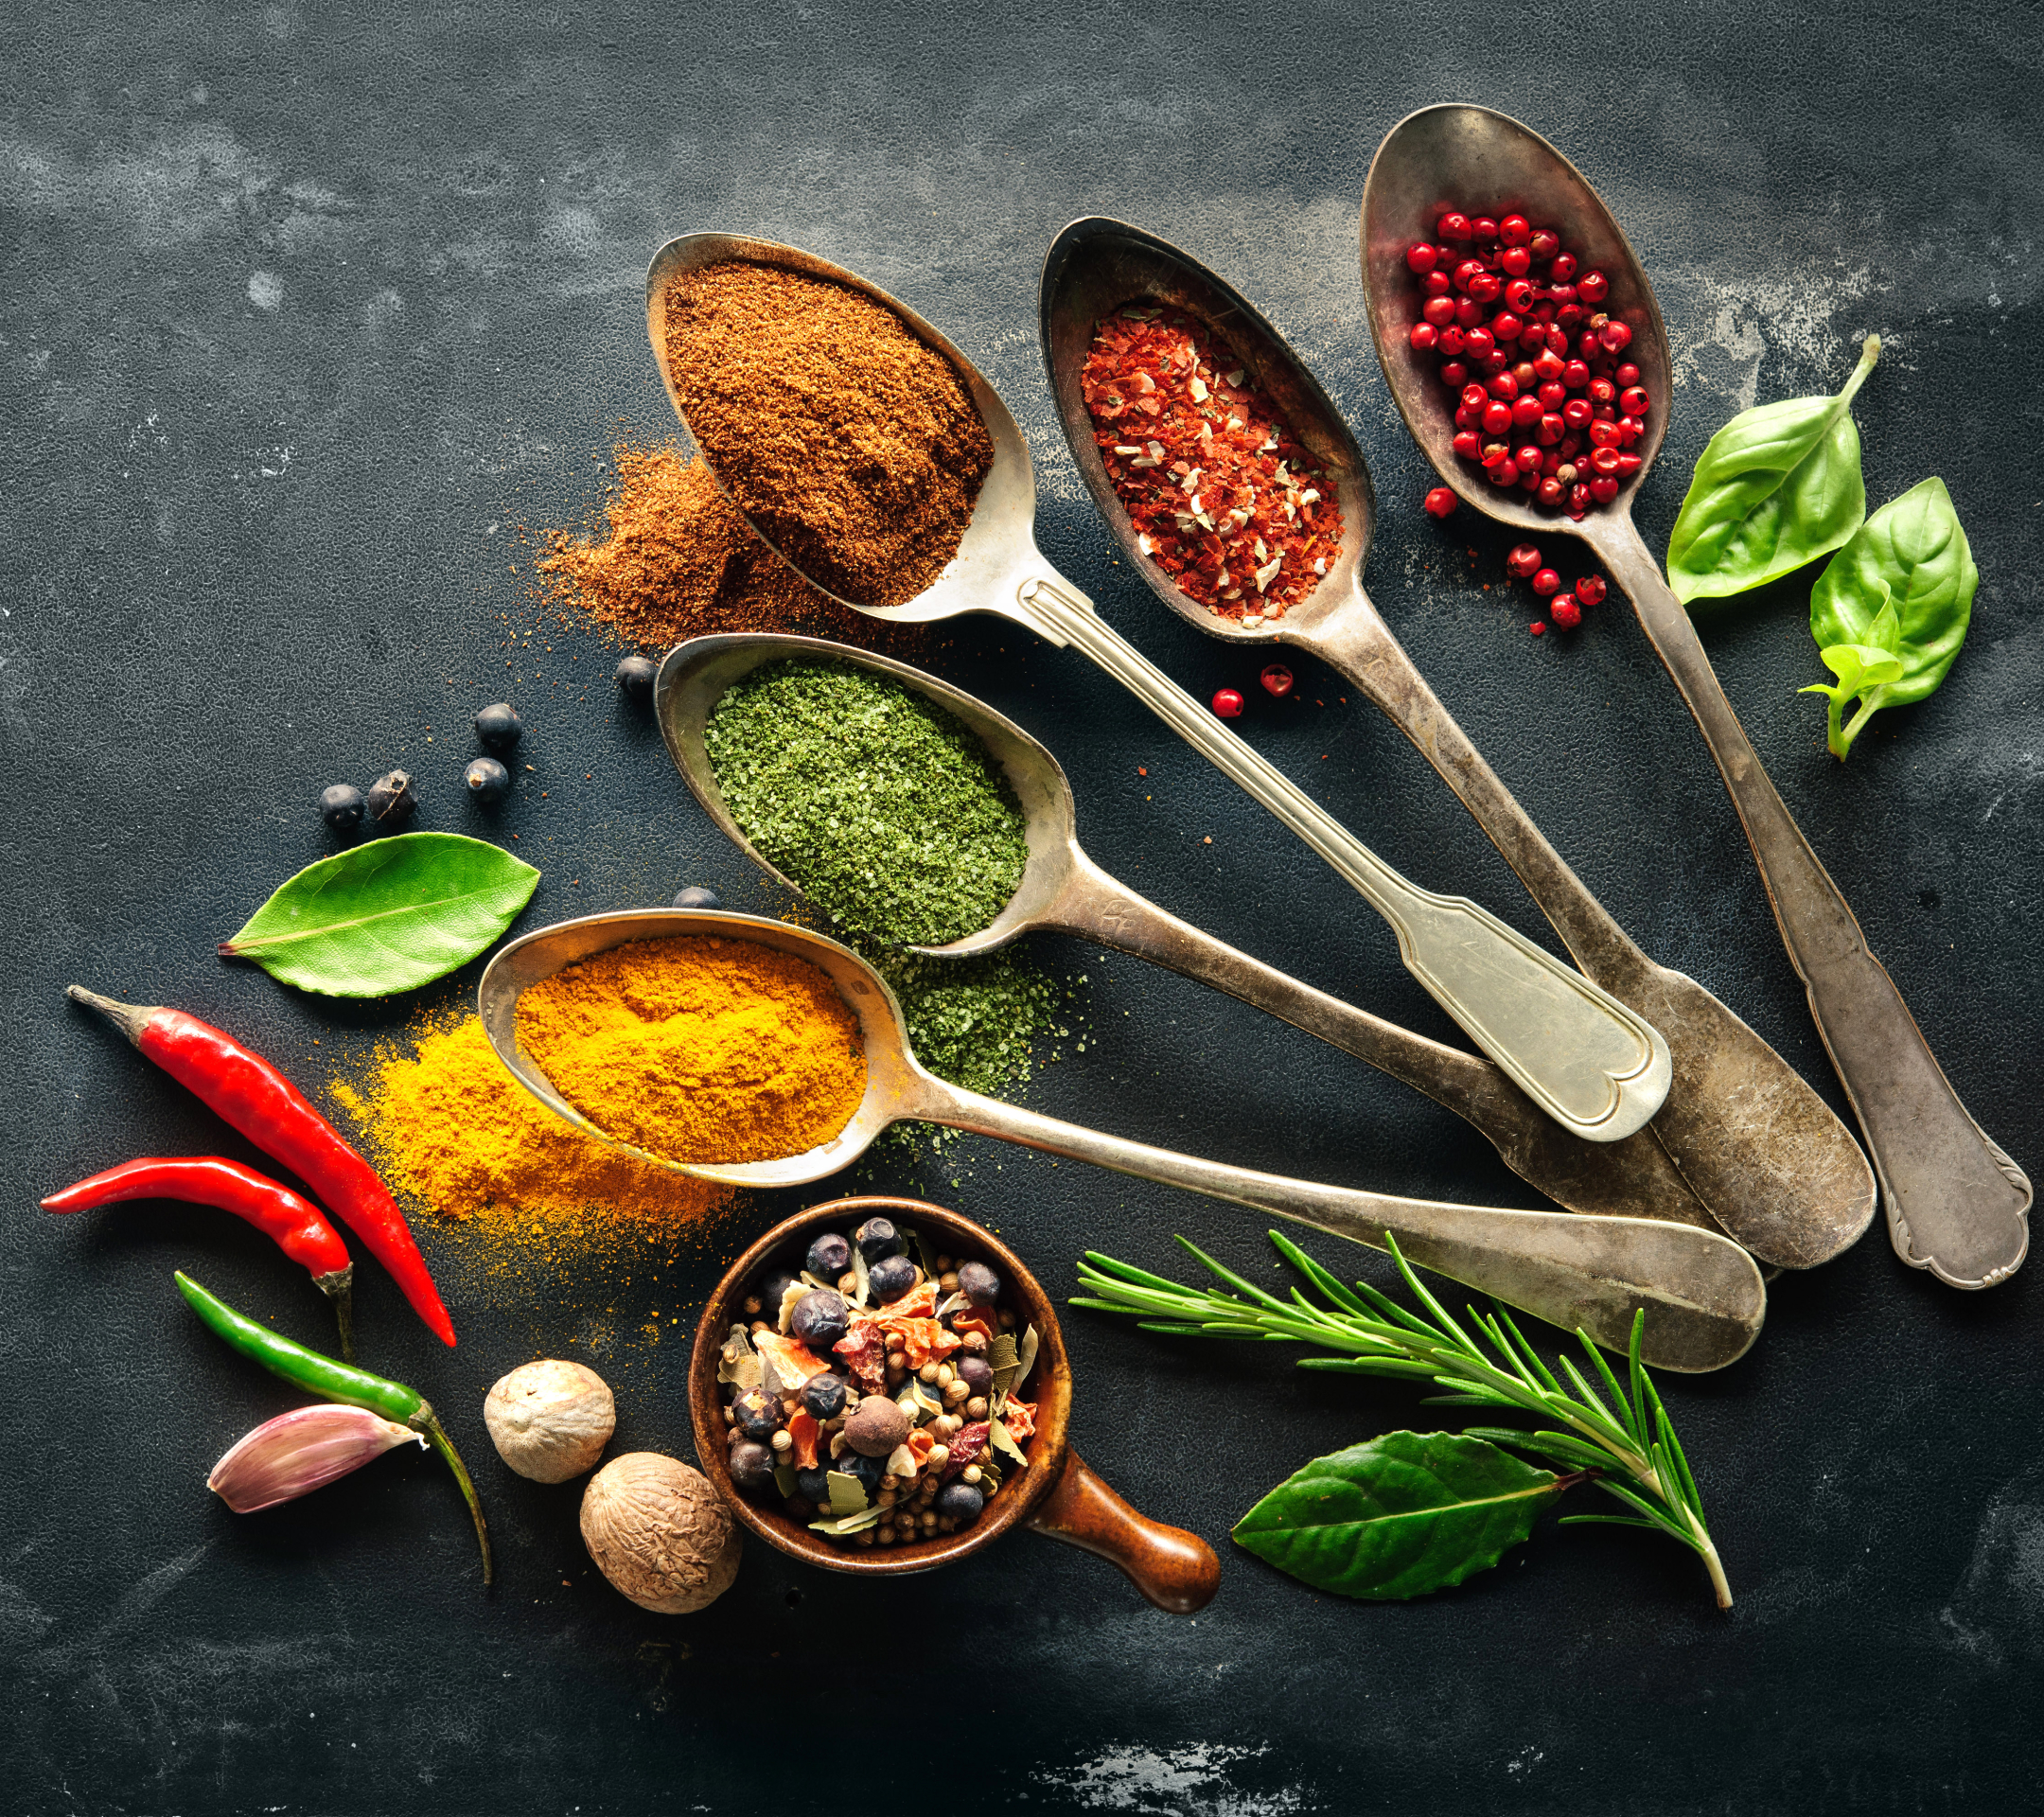 herbs and spices, food, herbs, spices, pepper, still life iphone wallpaper